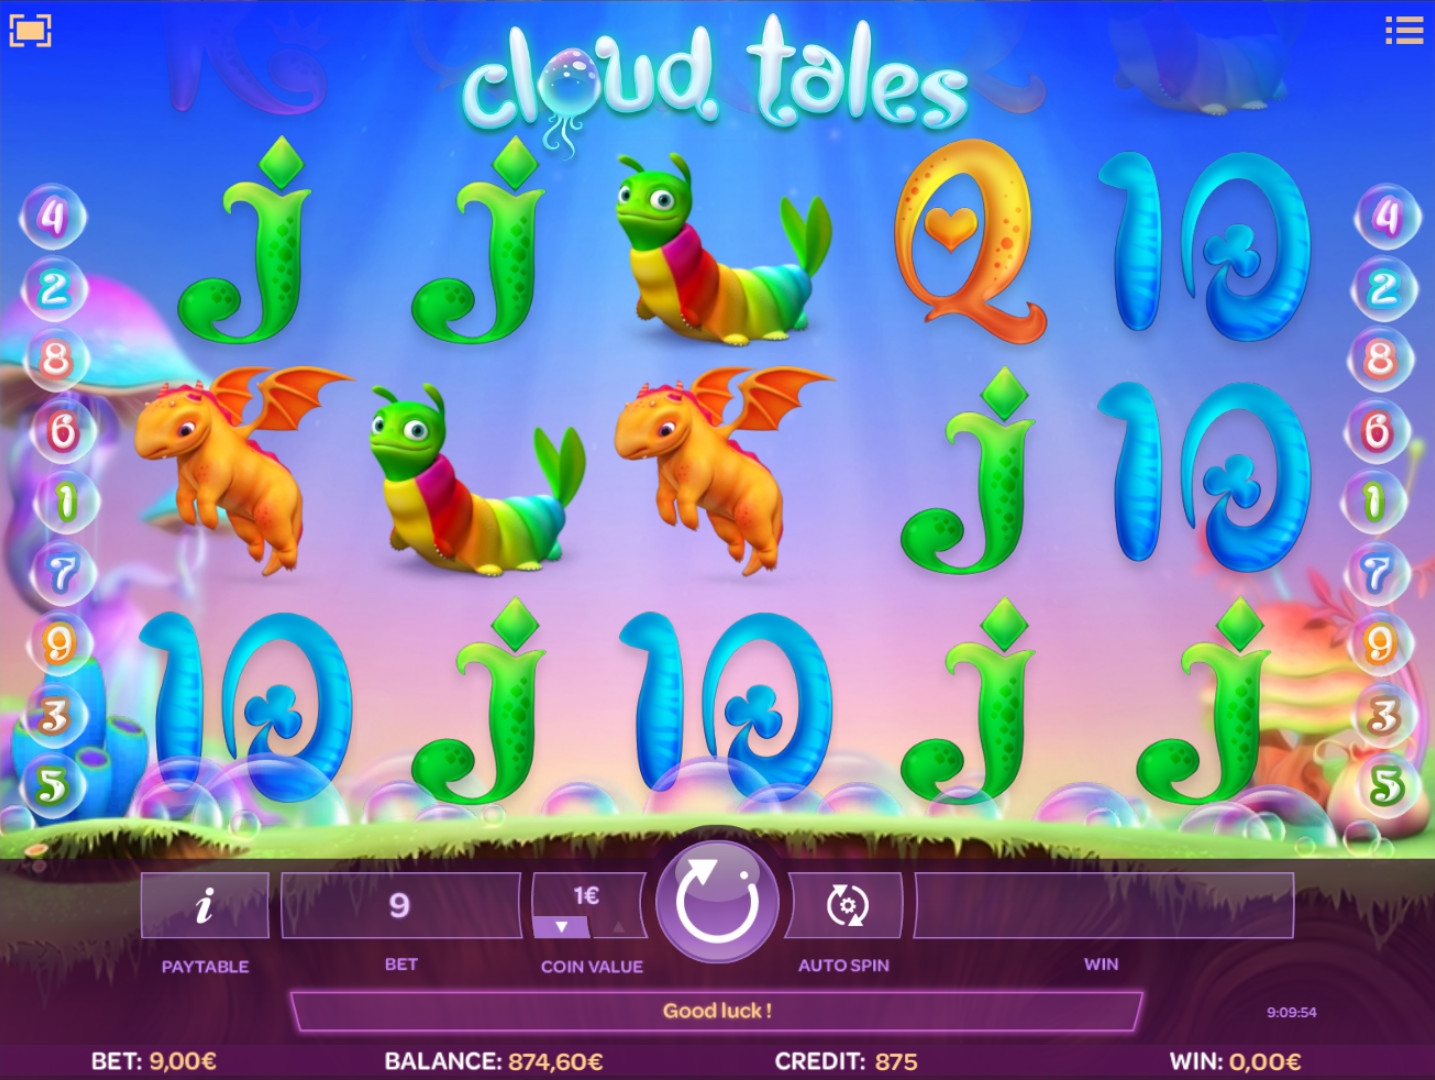 Cloud Tales (Cloud Tales) from category Slots